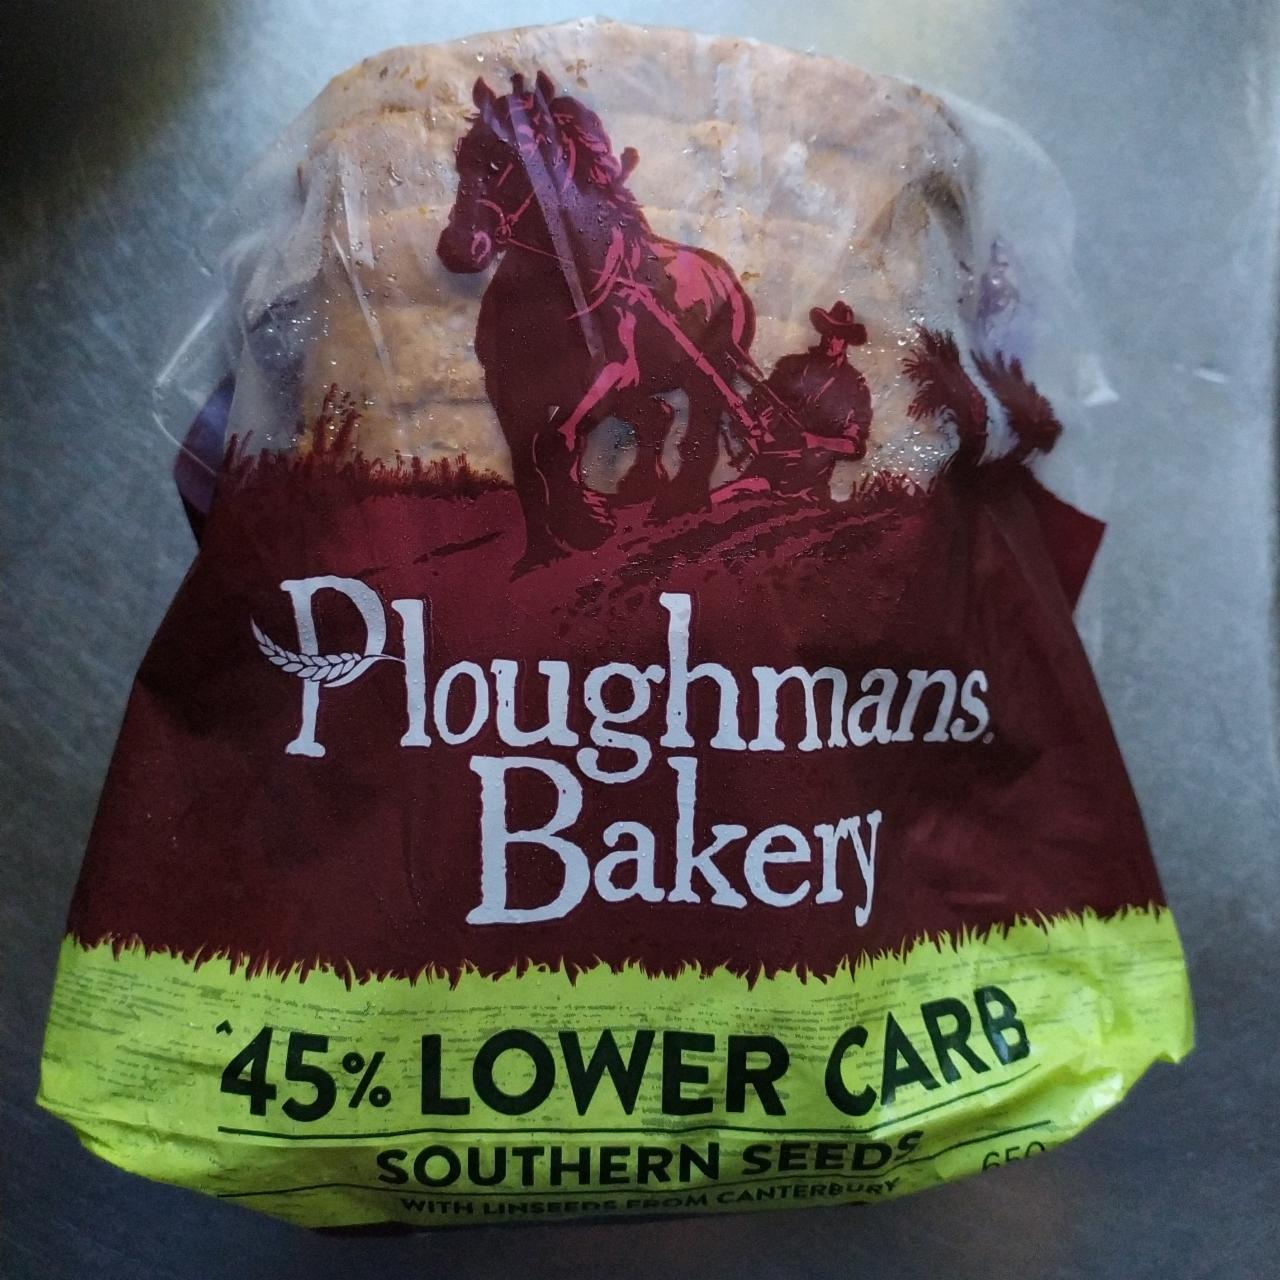 Fotografie - 45% lower carb Southern seeds bread Ploughmans Bakery